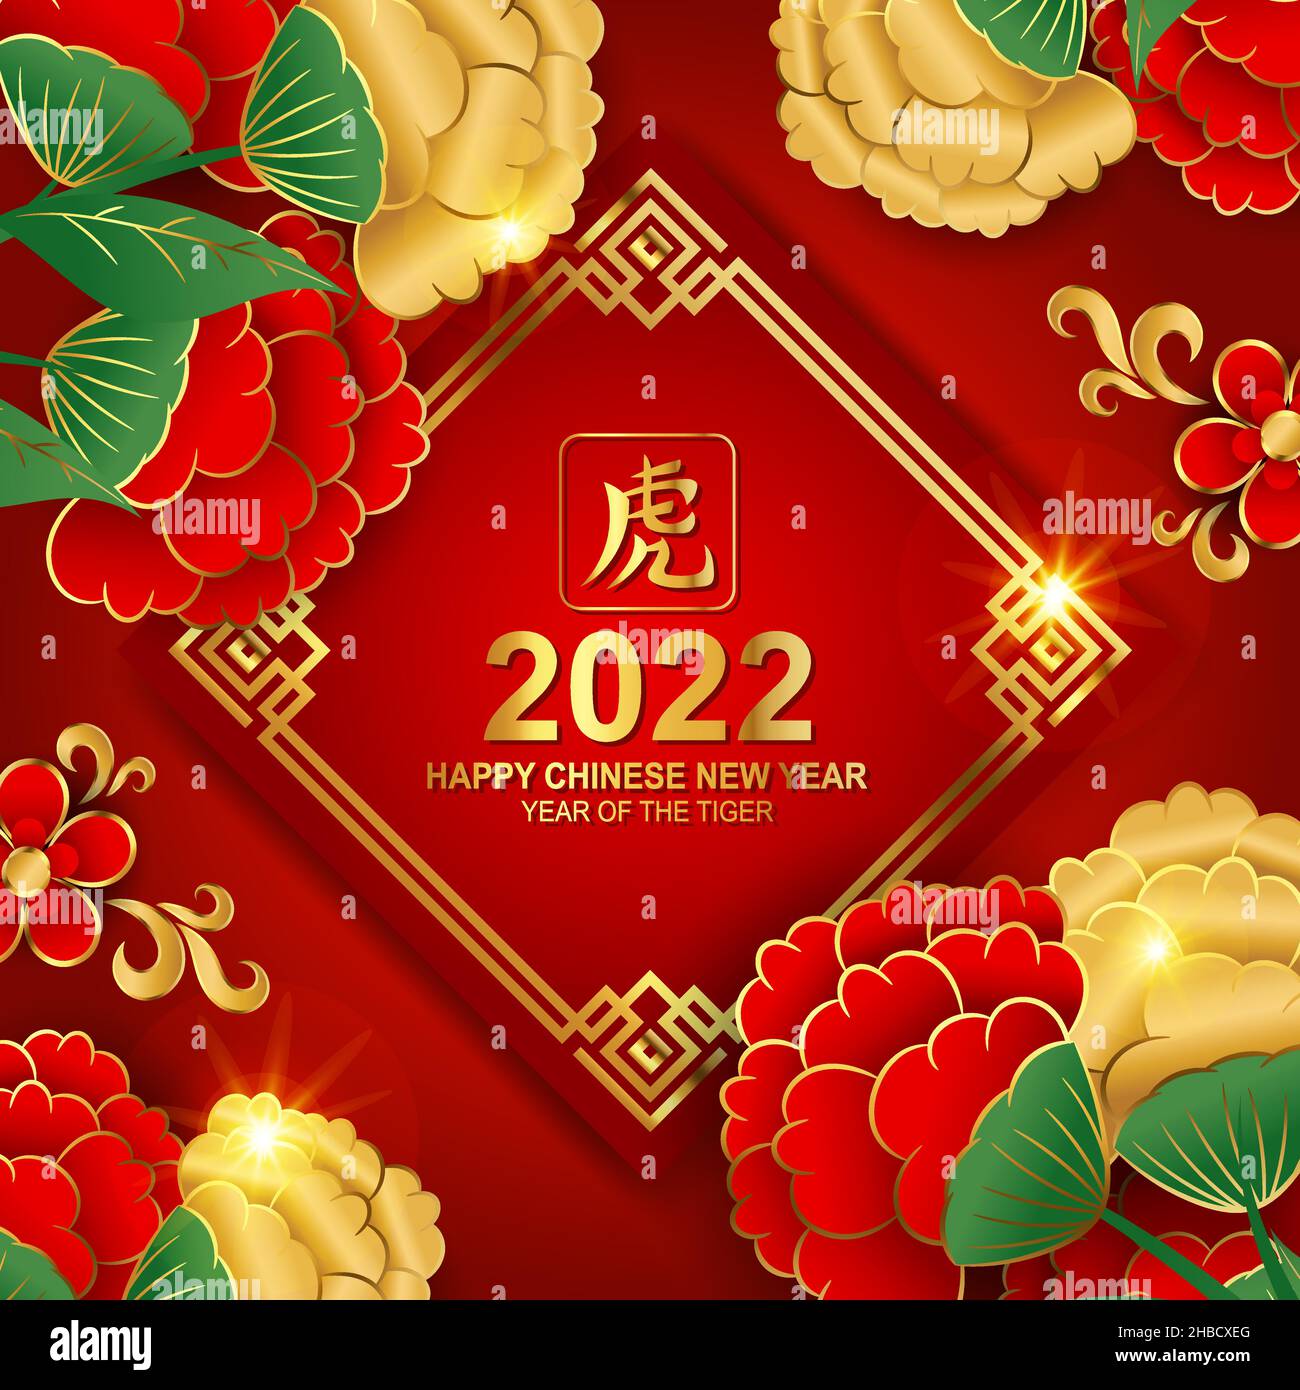 Happy Chinese new year 2022, year of the tiger luxury flower decoration Stock Vector